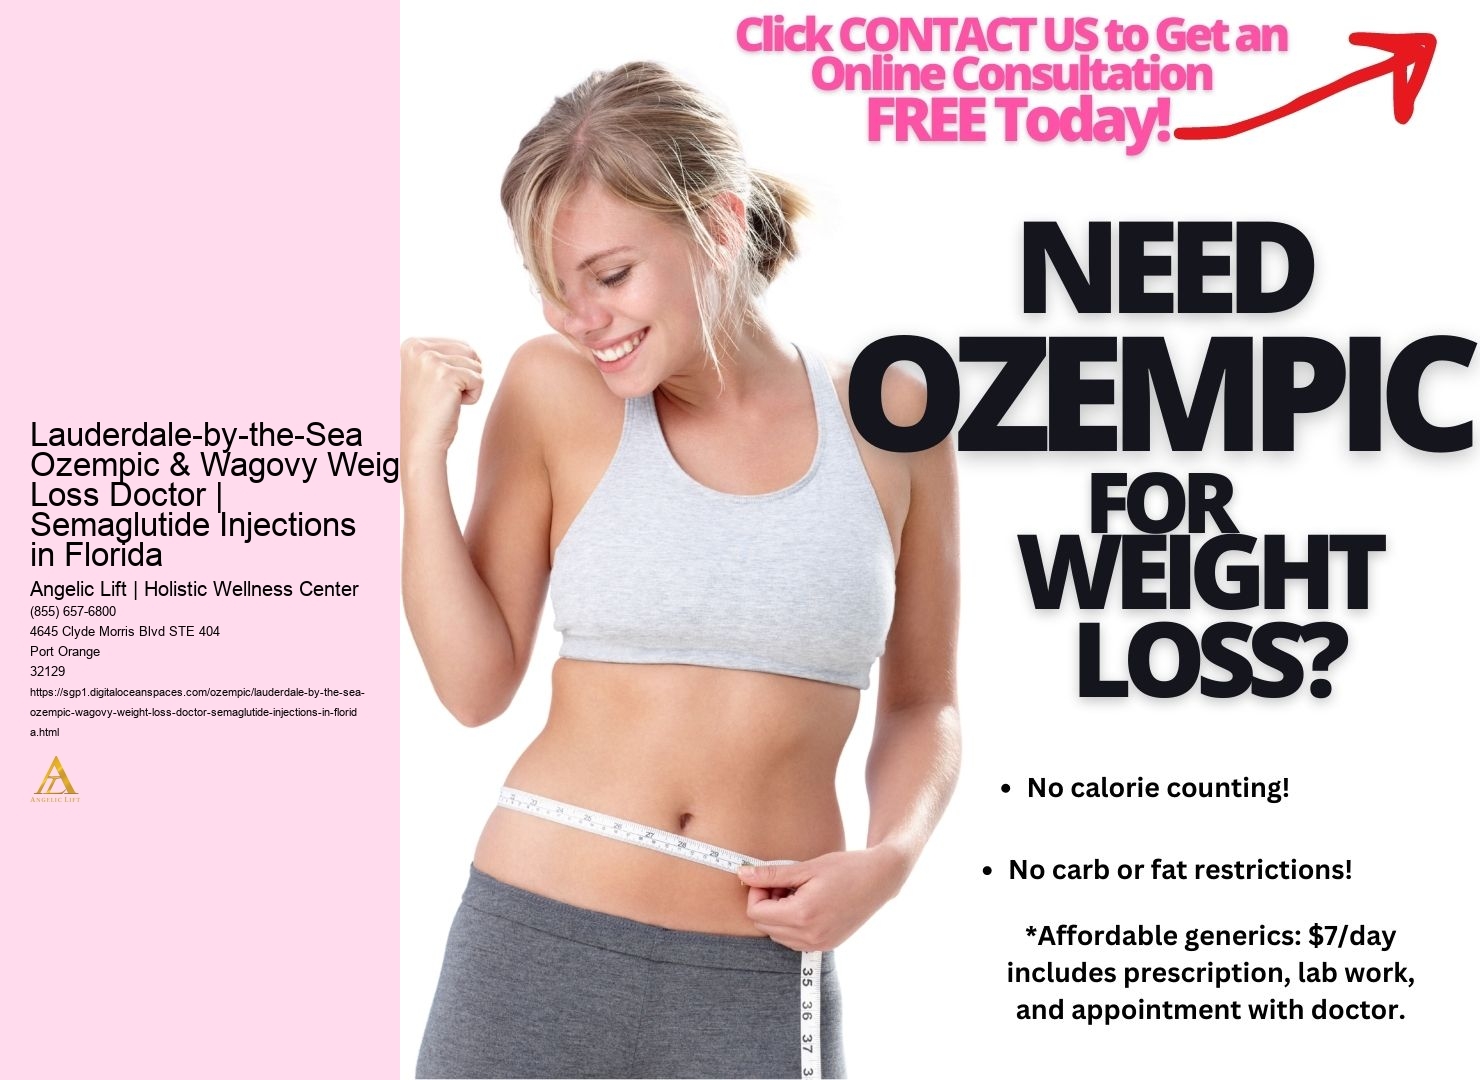 Lauderdale-by-the-Sea Ozempic & Wagovy Weight Loss Doctor | Semaglutide Injections in Florida